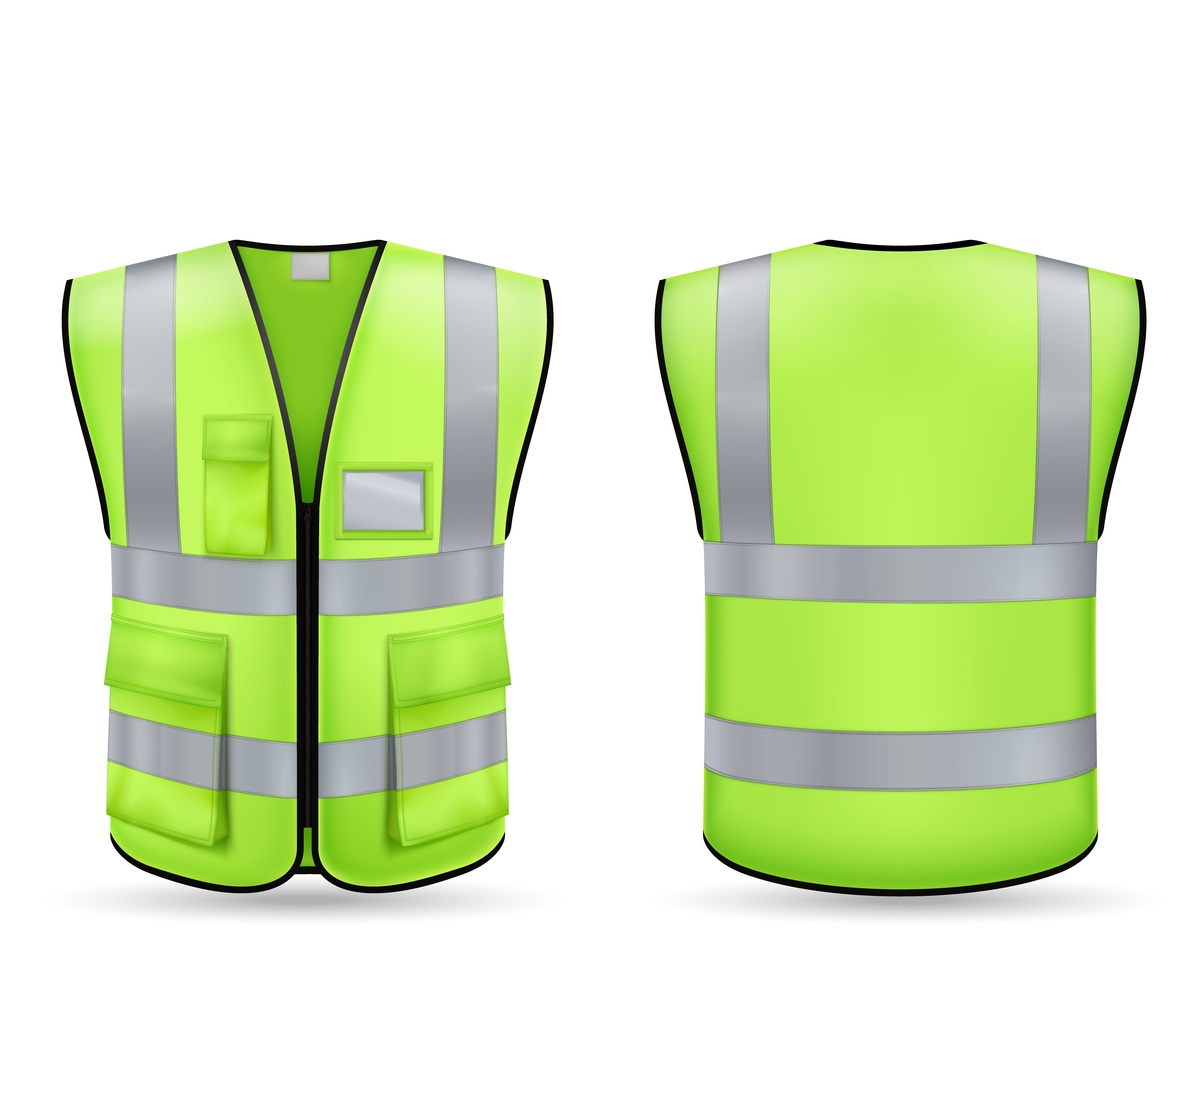 Enhance Workplace Safety with Safety Vests